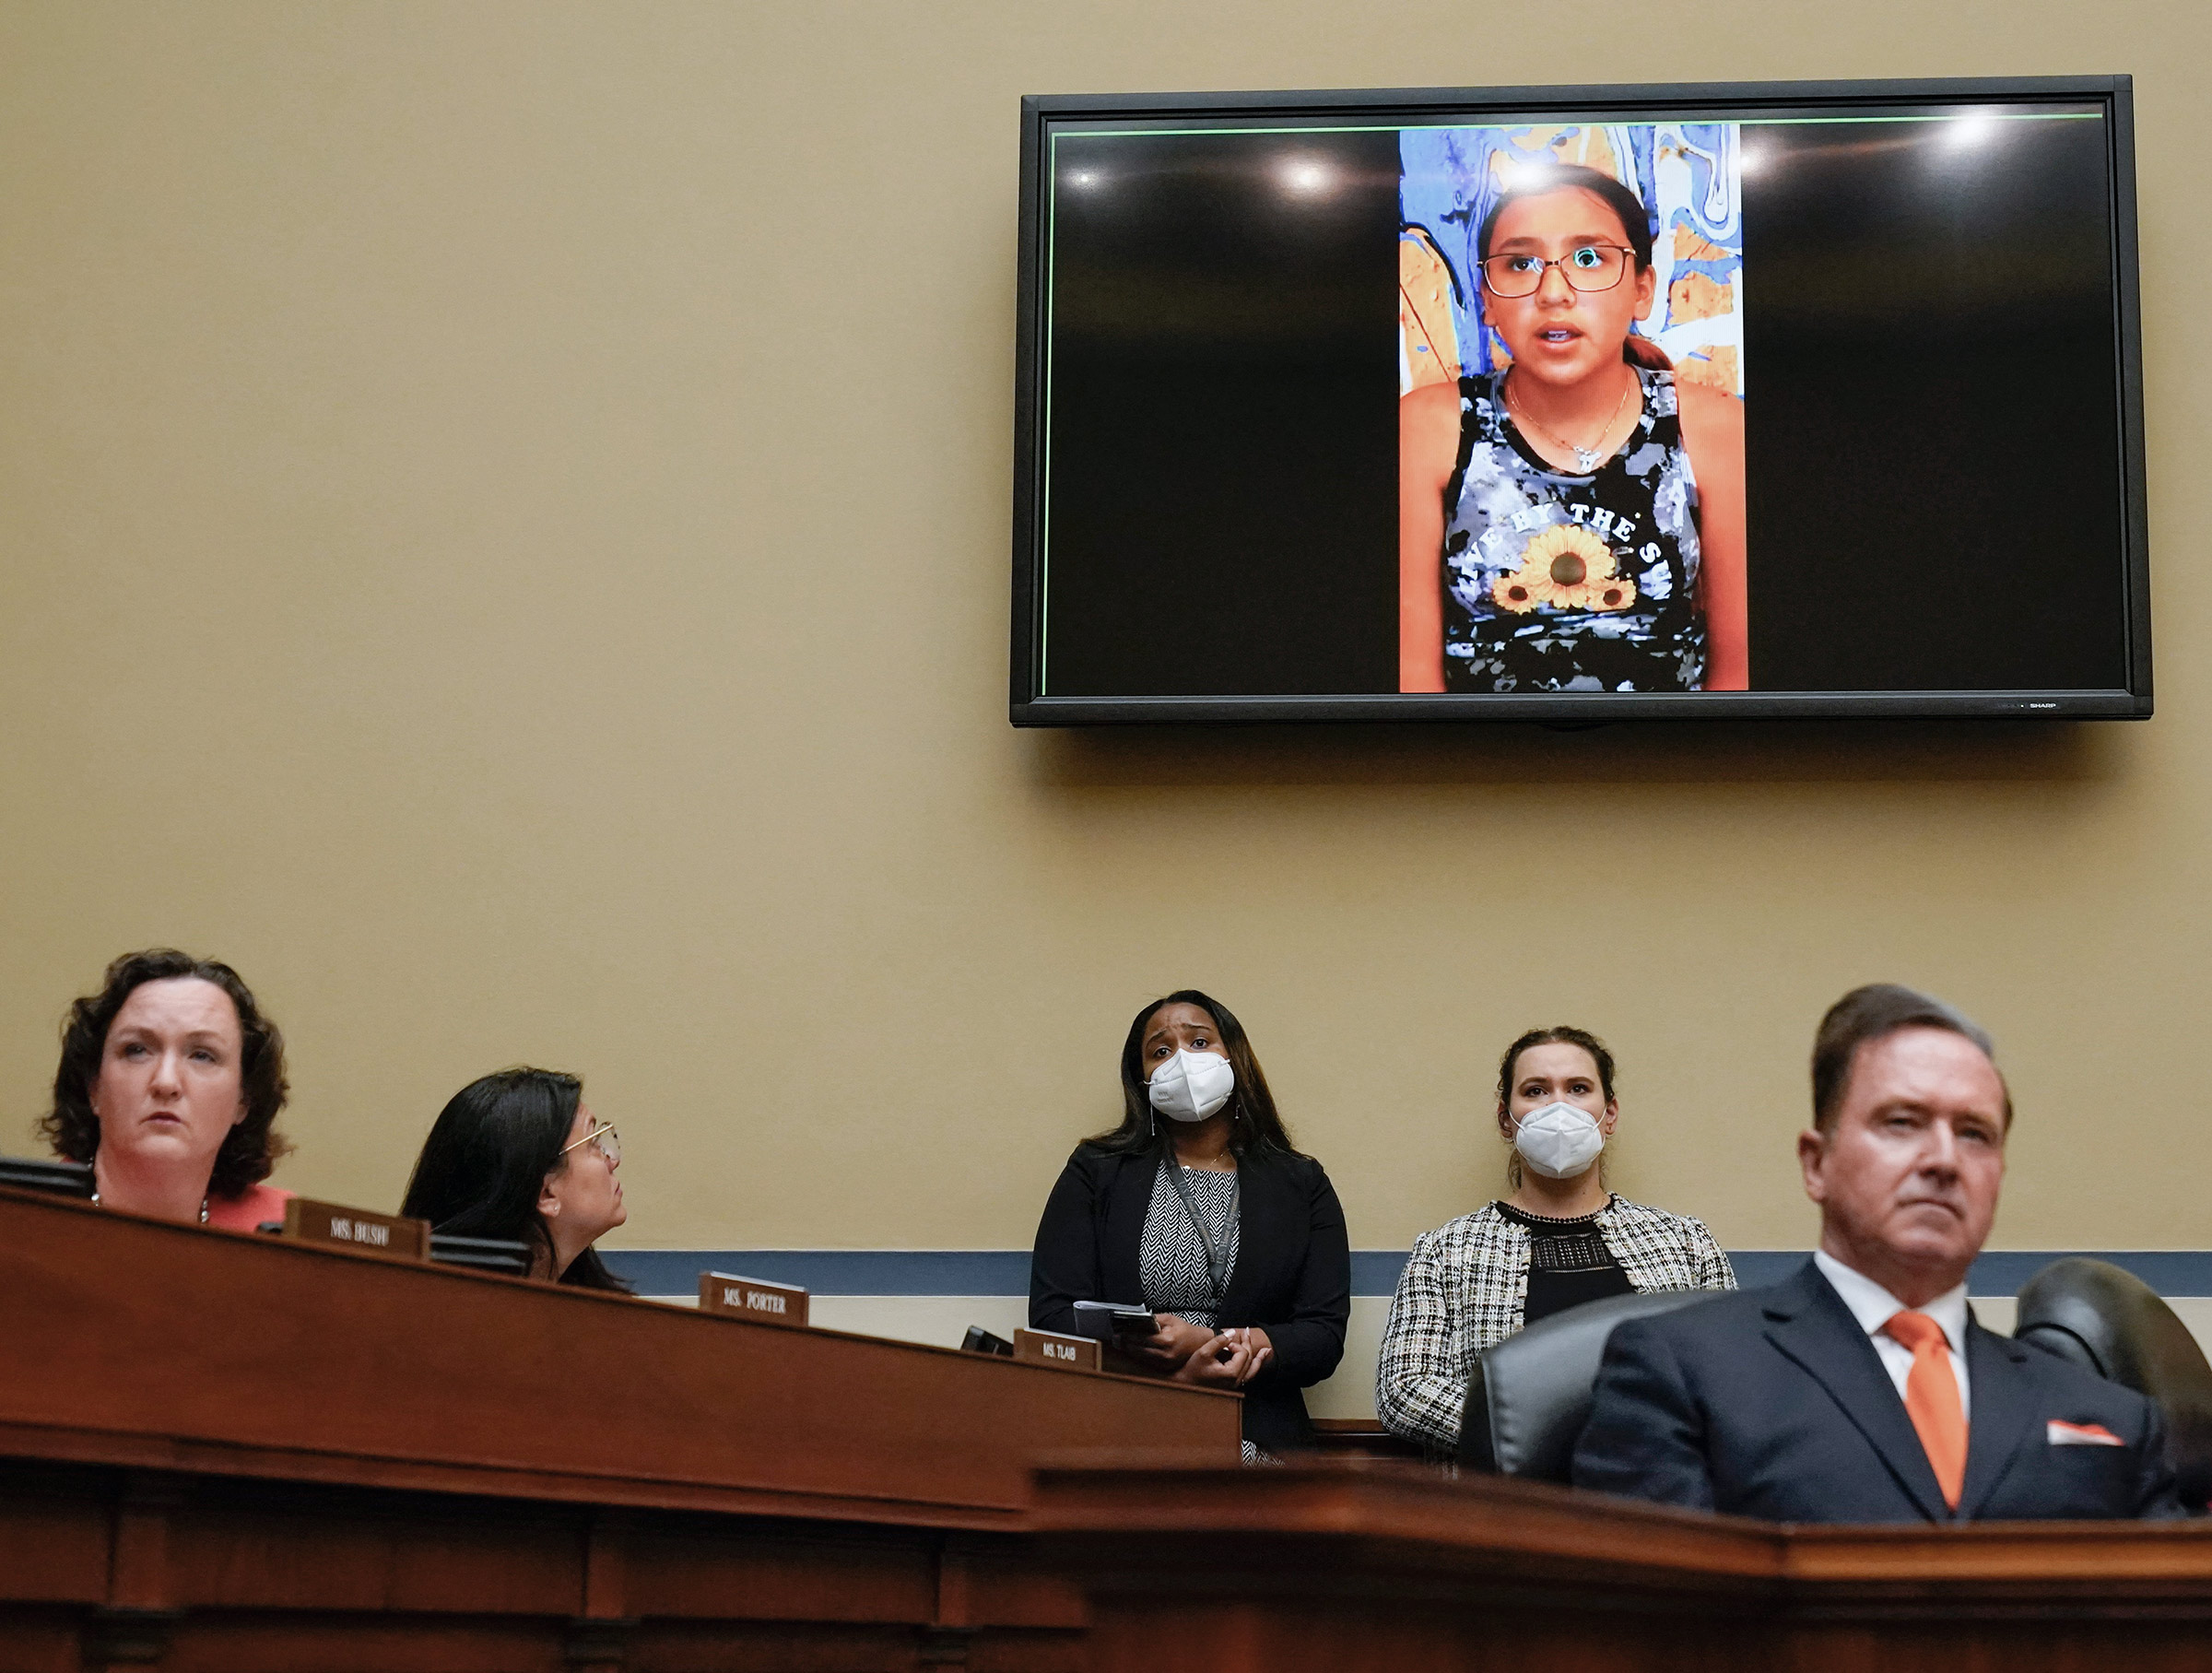 Miah Cerrillo, a fourth grade student at Robb Elementary School in Uvalde, Texas, and survivor of the mass shooting appears on a screen during a House Committee on Oversight and Reform hearing on gun violence on Capitol Hill in Washington, DC, on June 8, 2022. (Andrew Harnik — Pool/AFP/Getty Images)